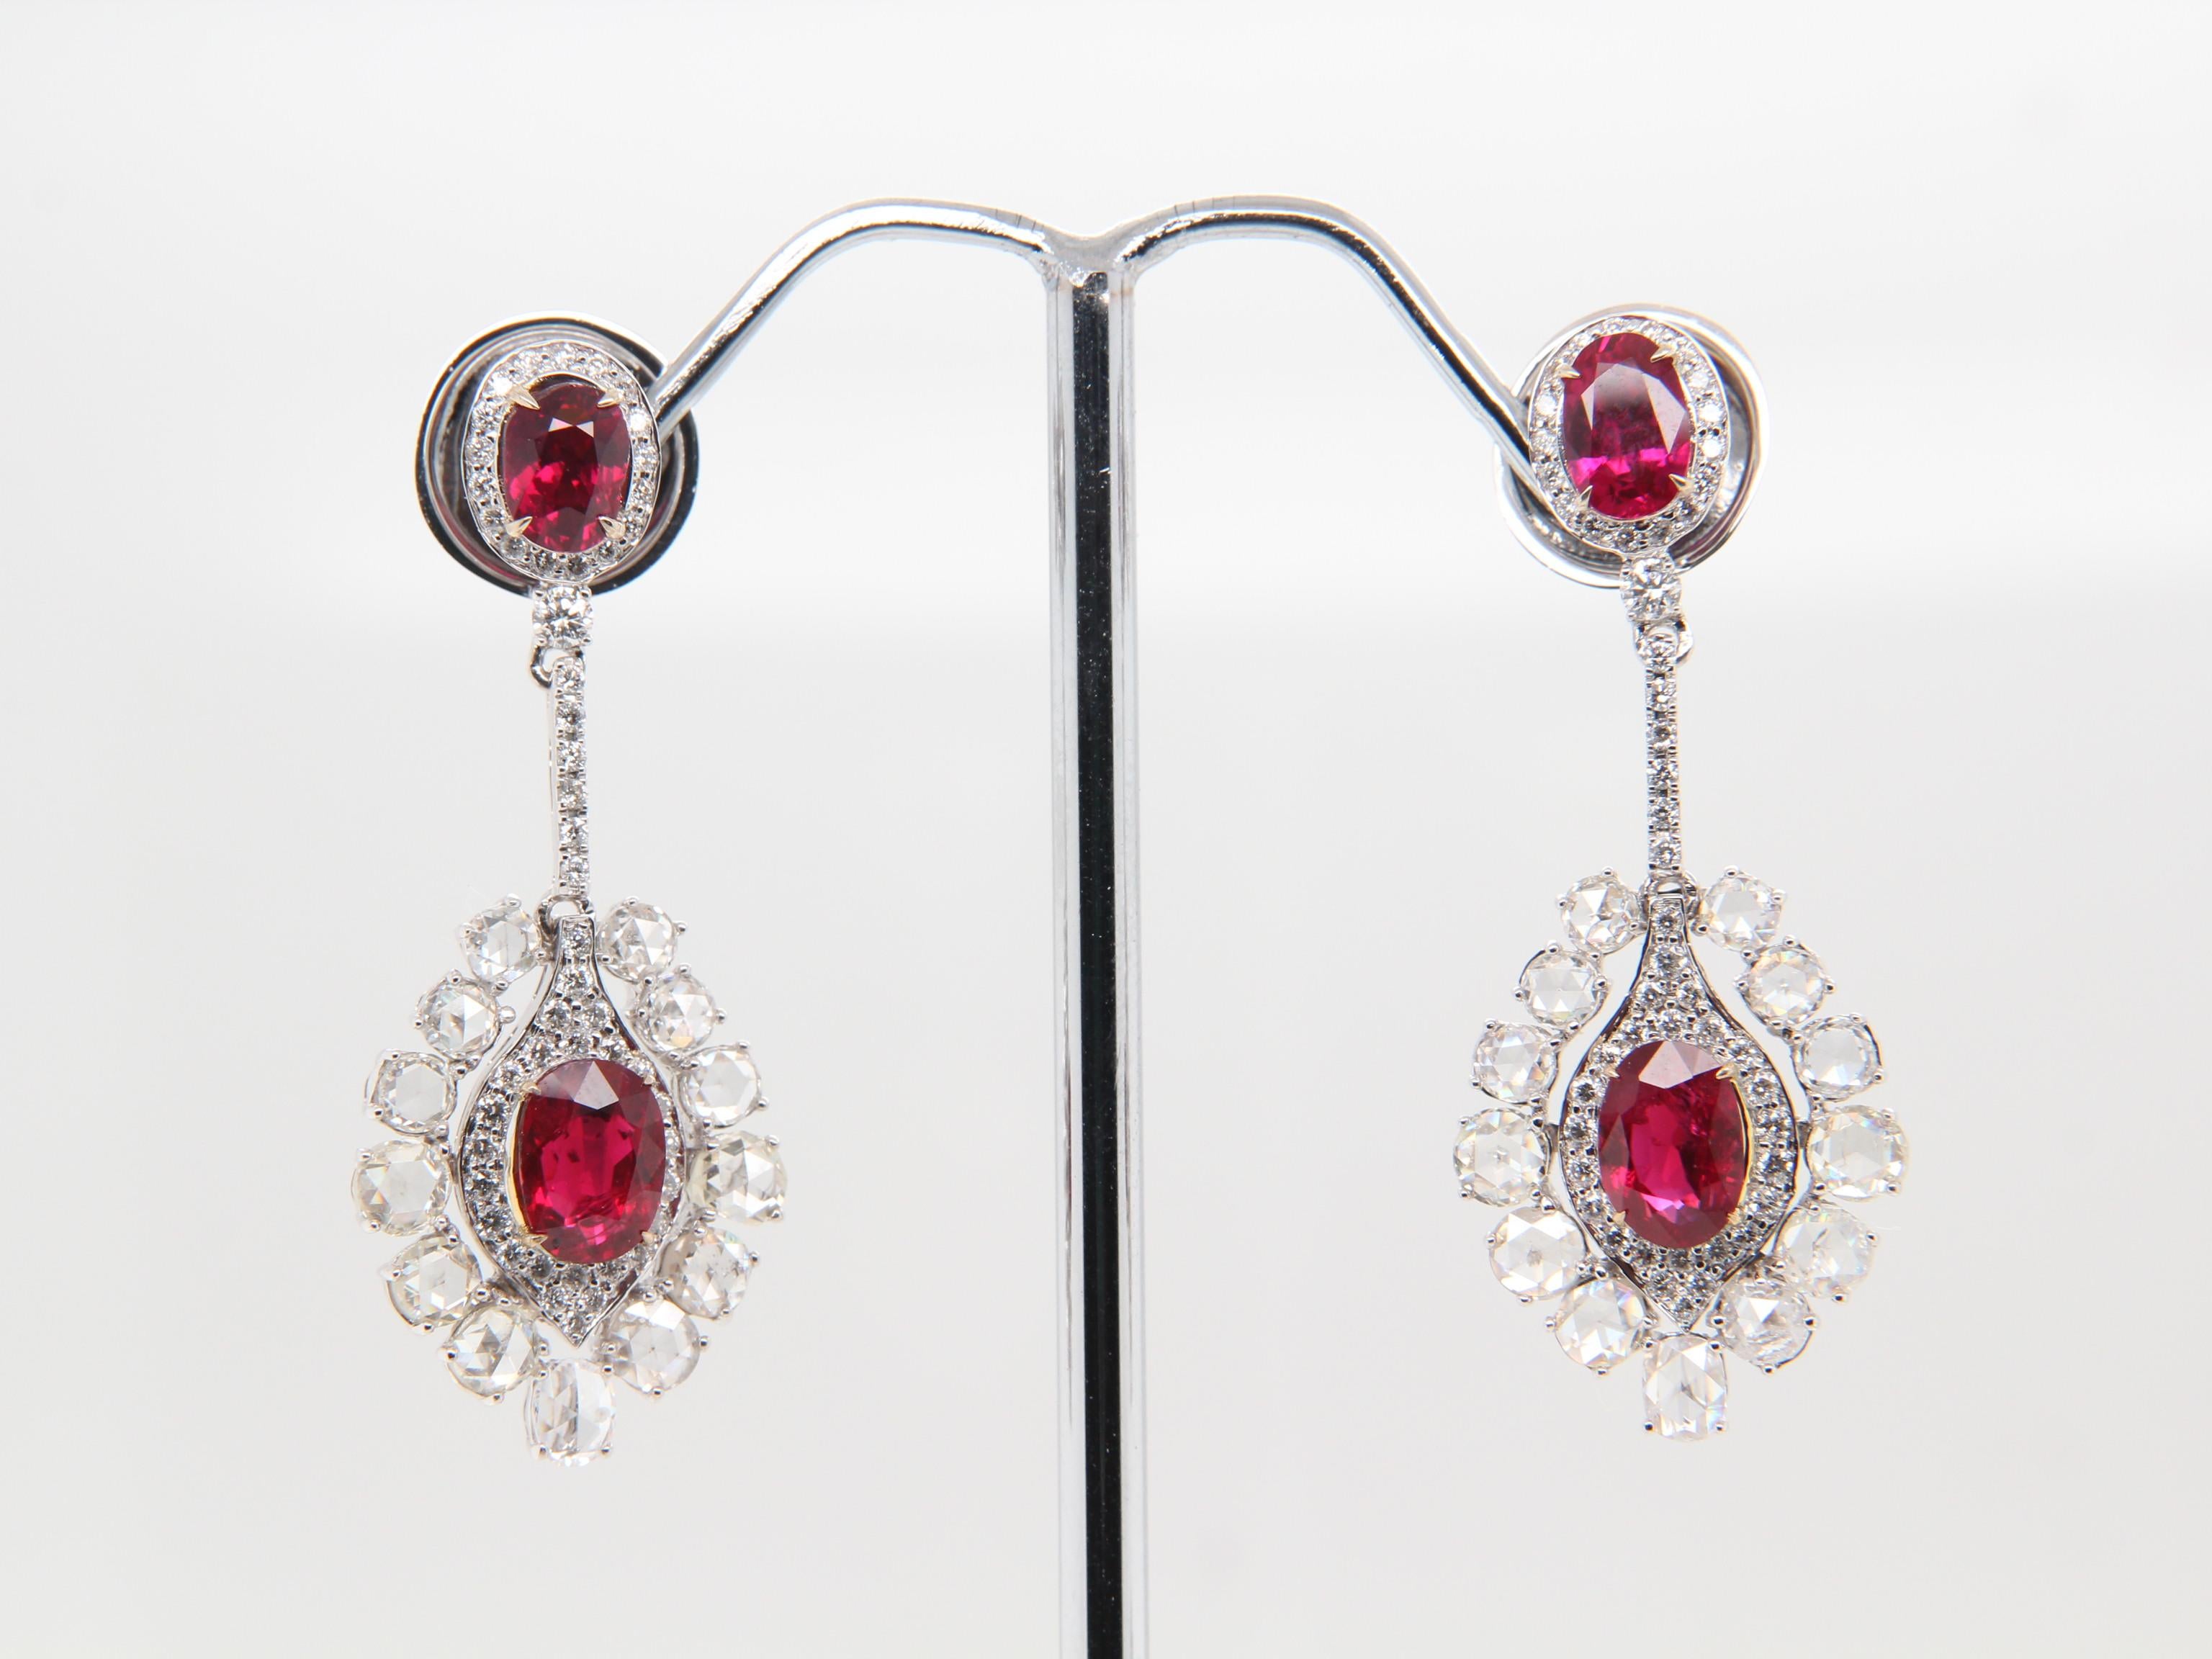 A fiery pair of rare Burmese ruby and diamond earrings. The lustrous rubies' vivid and vibrant colours showcases why Burmese rubies are the best. This rare piece will not only help to exude confidence and importance, it also sets you apart from the